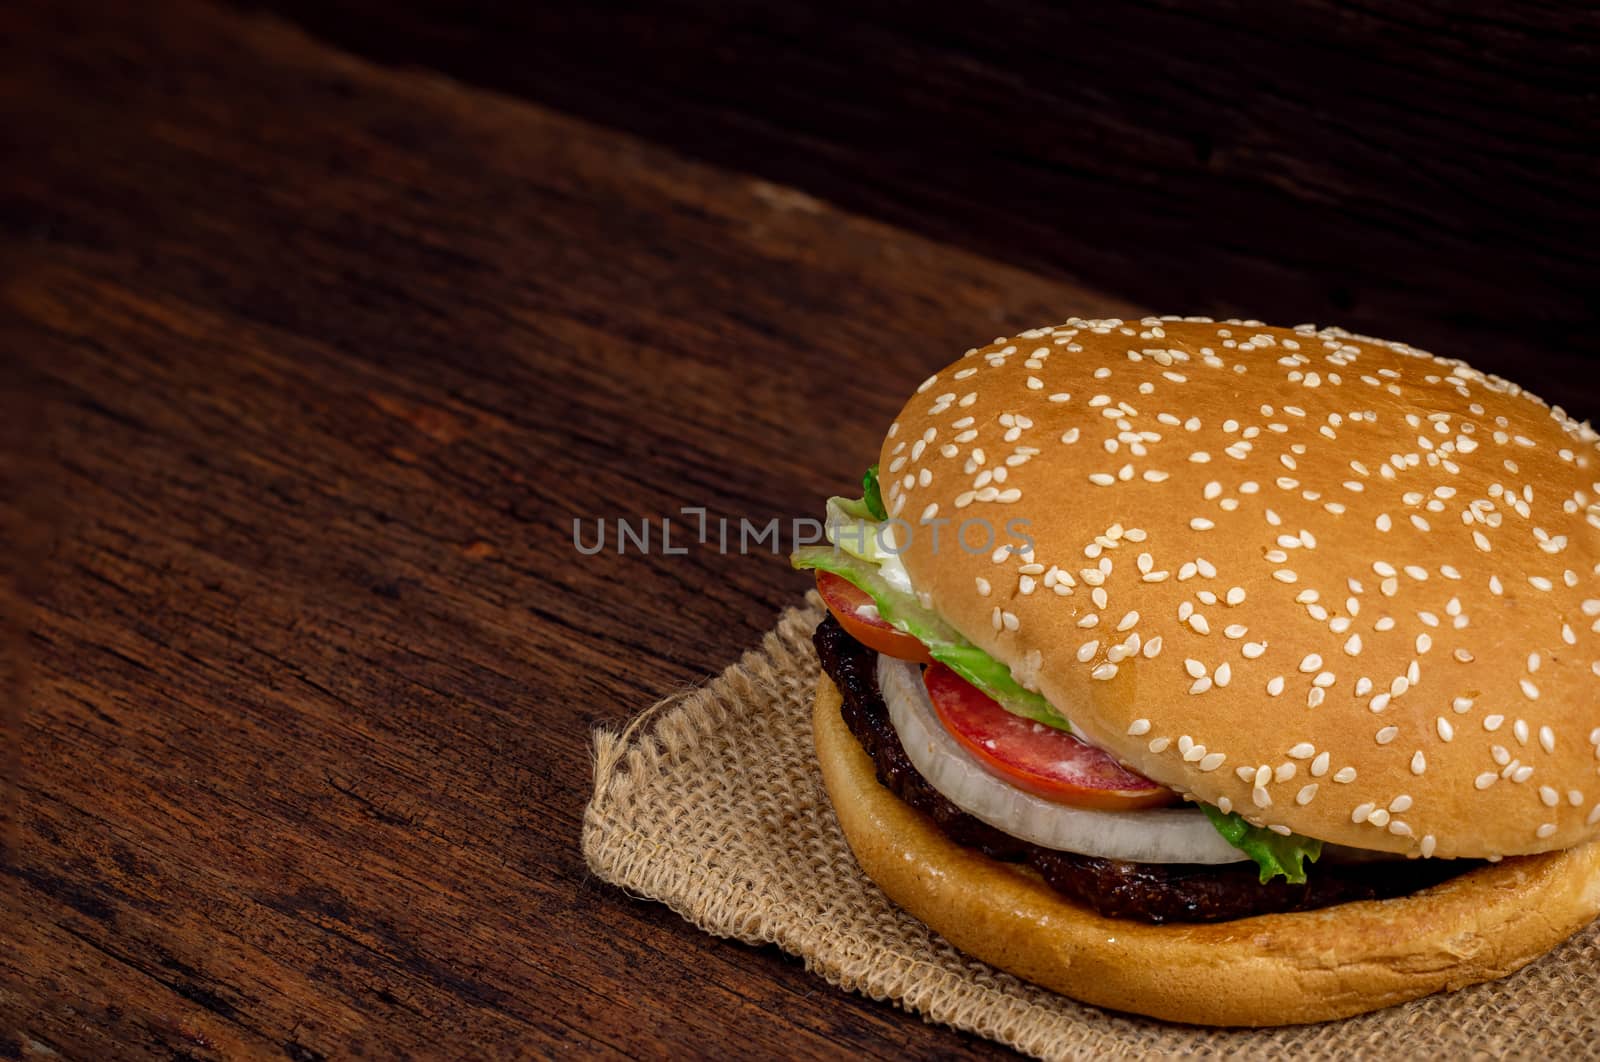 Hamburger meat and vegetables on wooden background